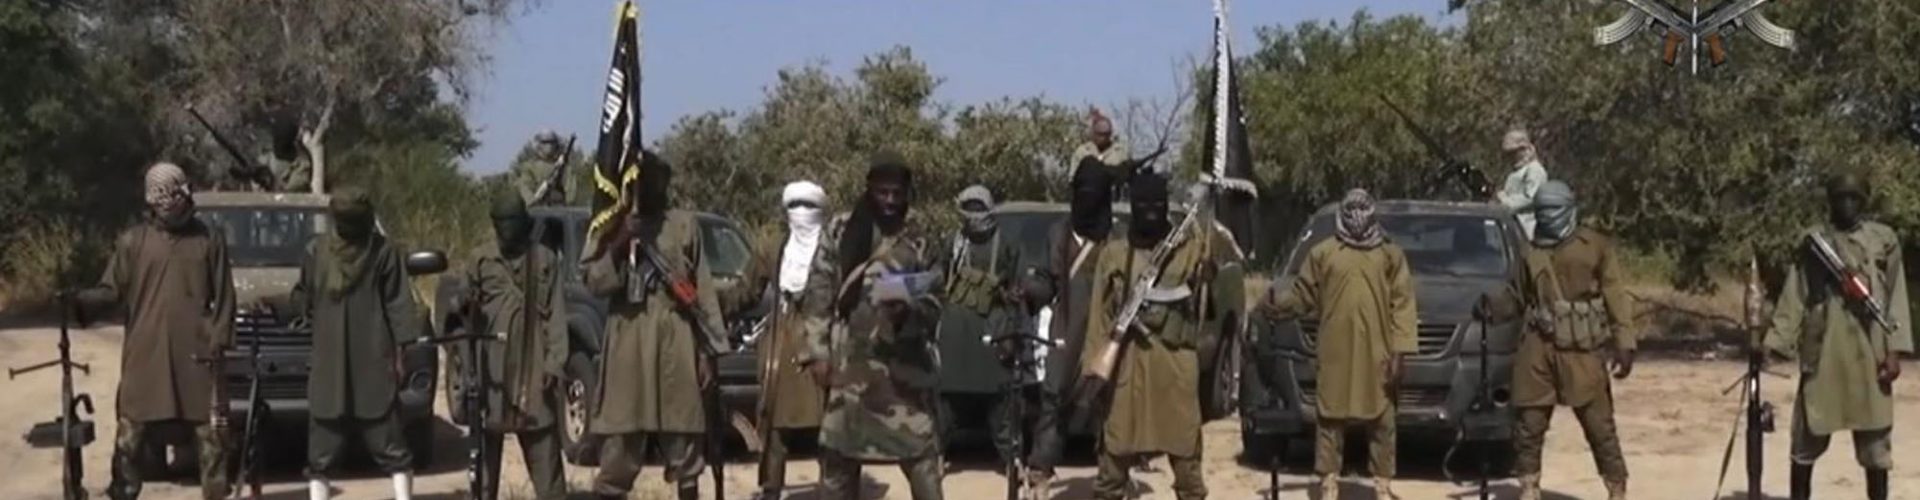 Nigerian Islamic Jihadists Massacred 1, 470 Christians In First Four Months Of 2021, Abducted Over 2,200